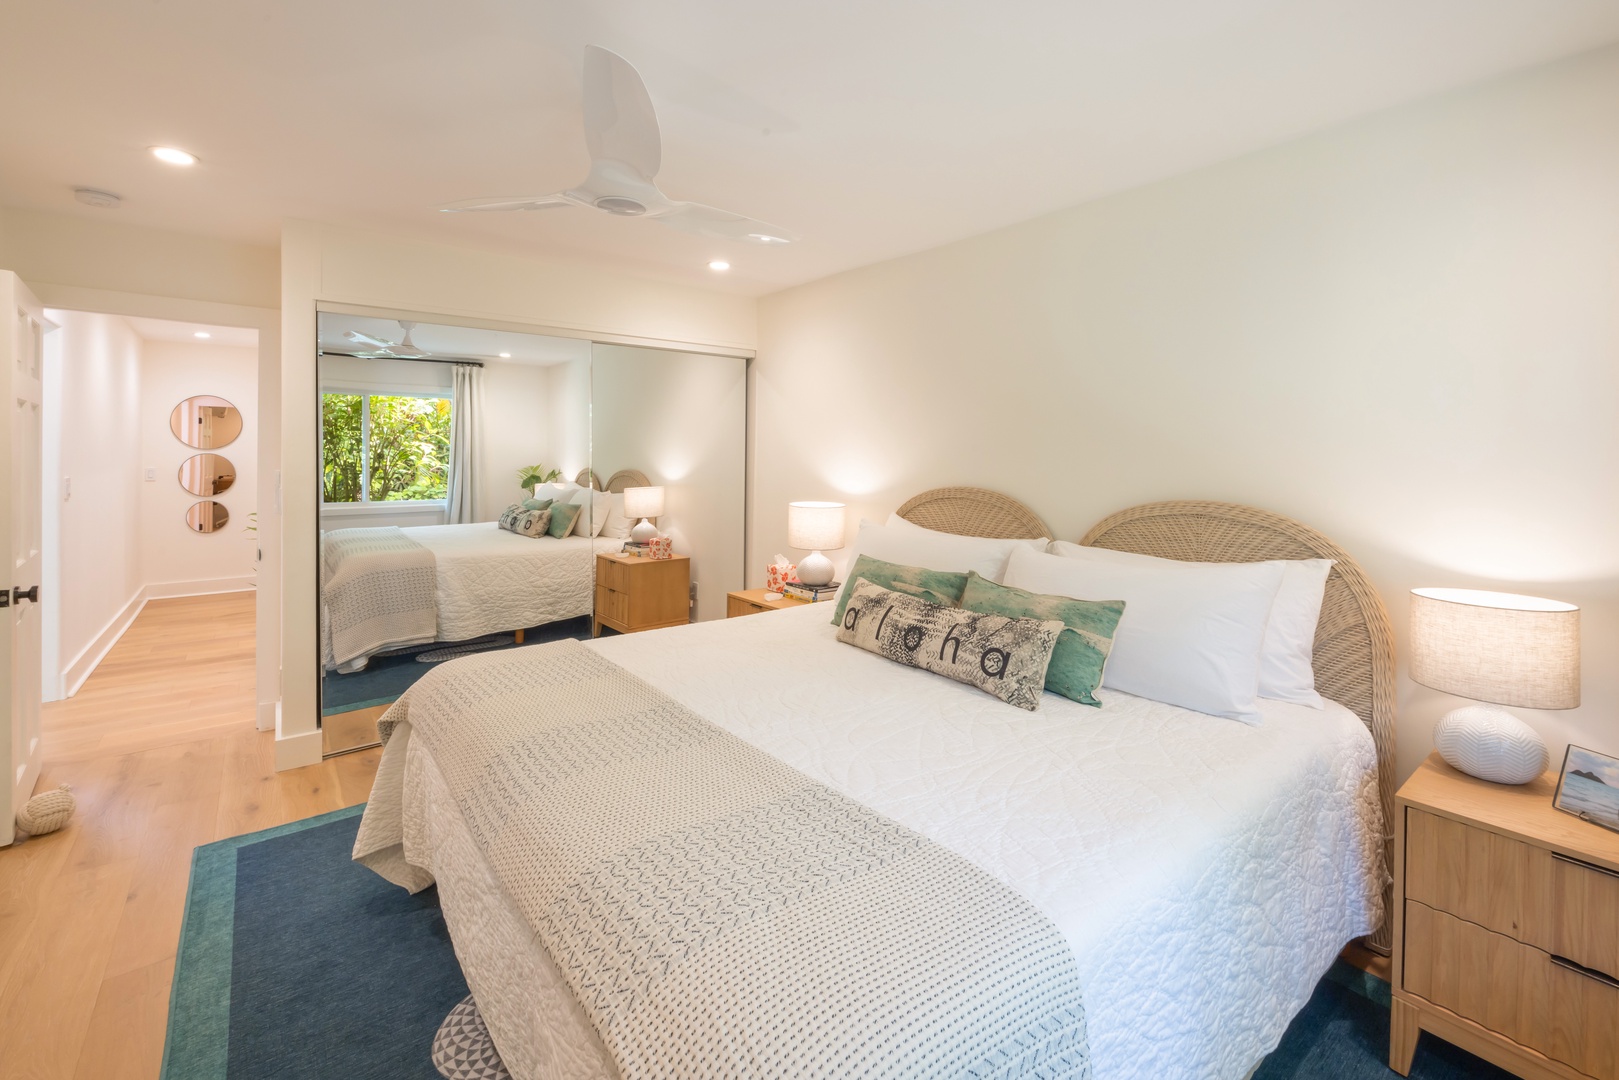 Kailua Vacation Rentals, Lanikai Ola Nani - A cozy and restful slumber in our guest suite